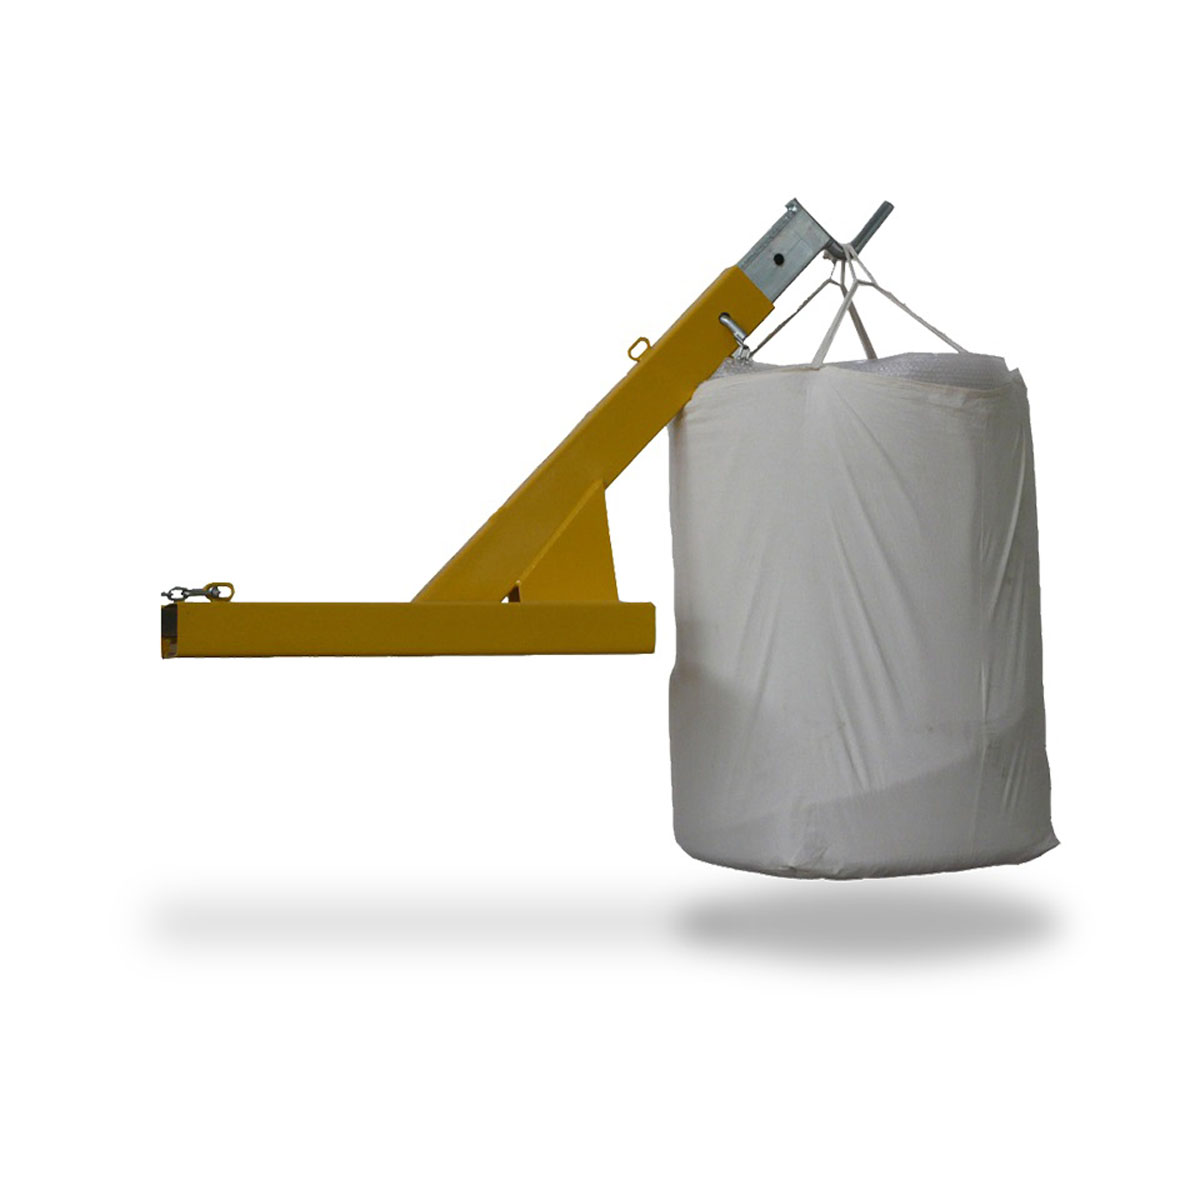 Buy Bulk Bag Lifter  in Forklift Attachments from Astrolift NZ